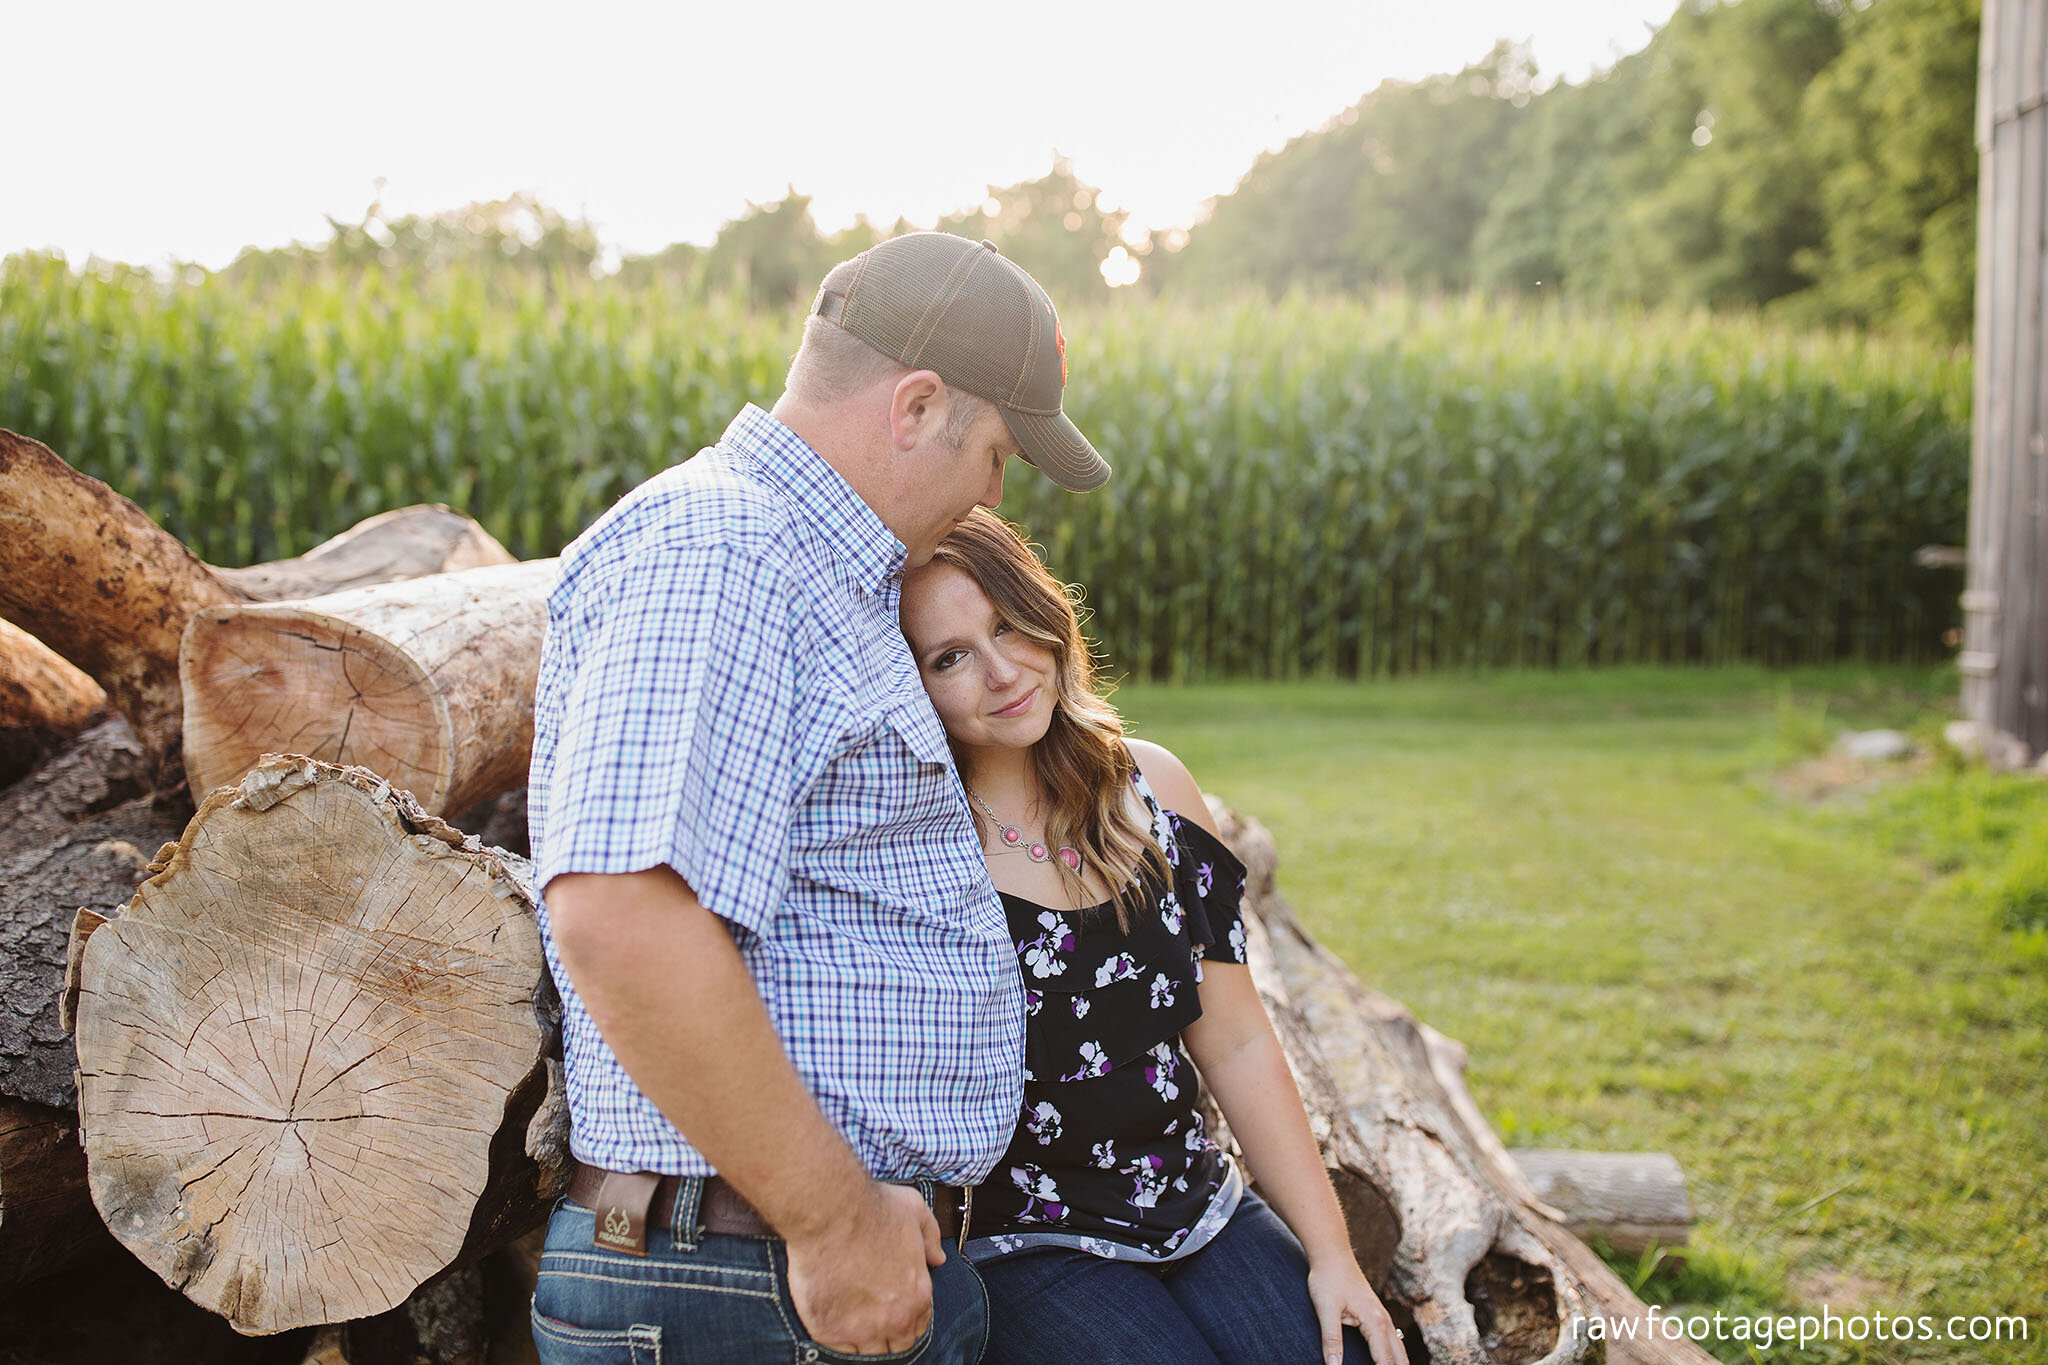 london_ontario_wedding_photographer-engagement_session-farm_engagement-country_e_session-raw_footage_photography-corn_field-008.jpg